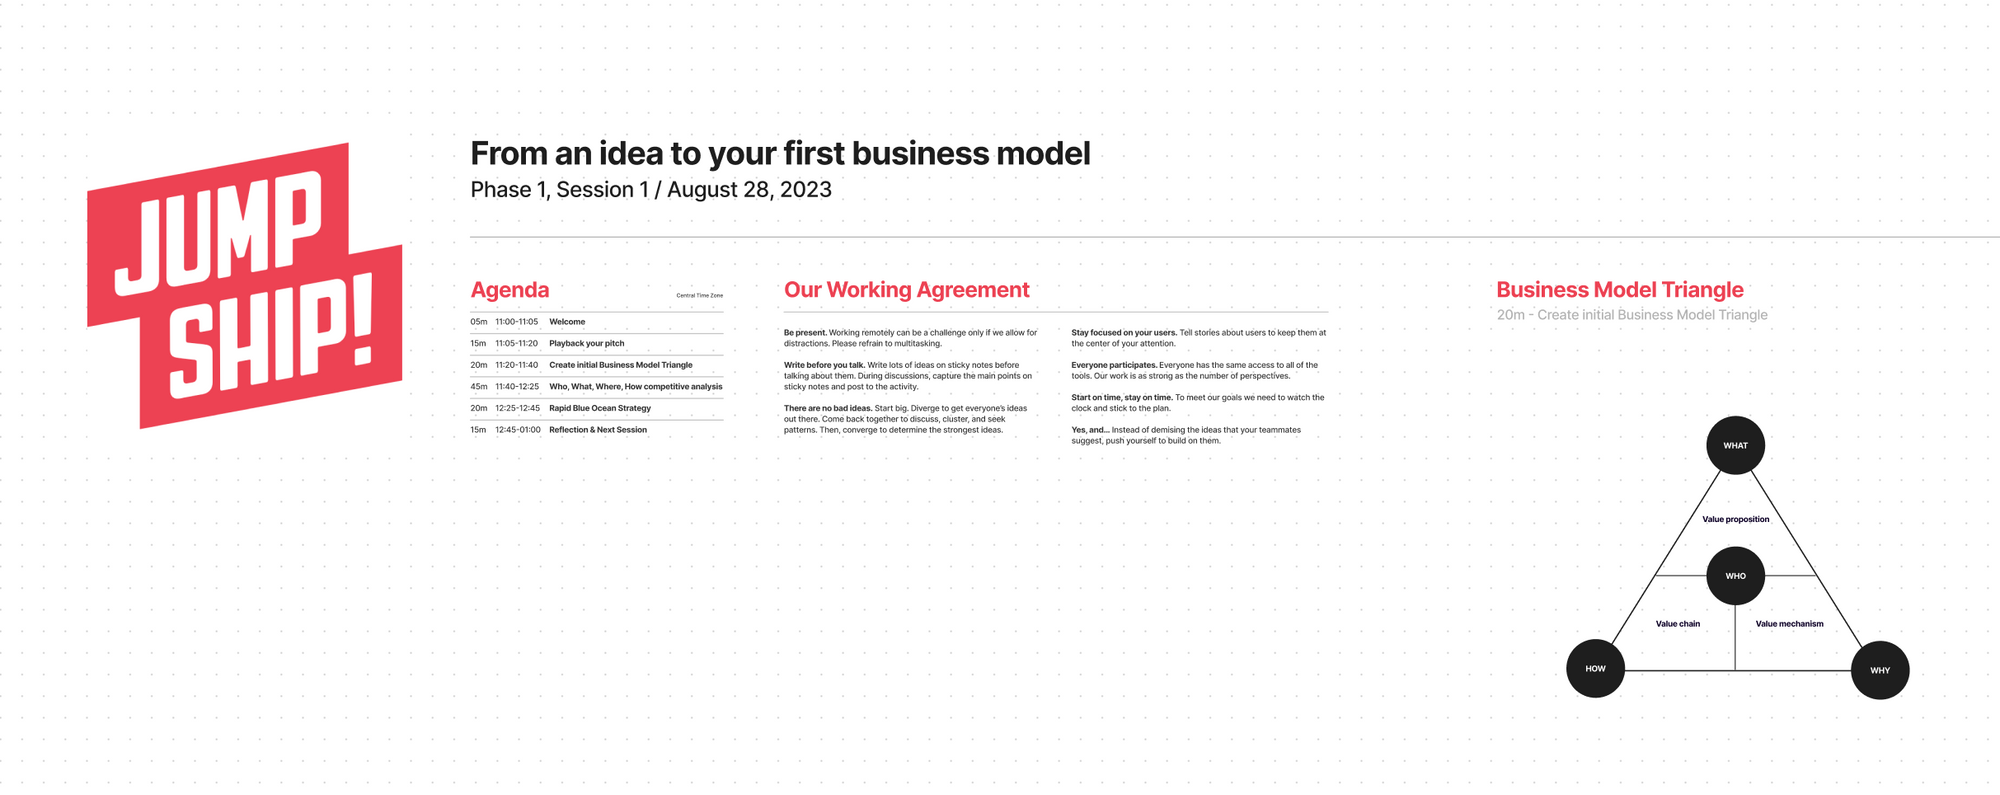 From an idea to your business model